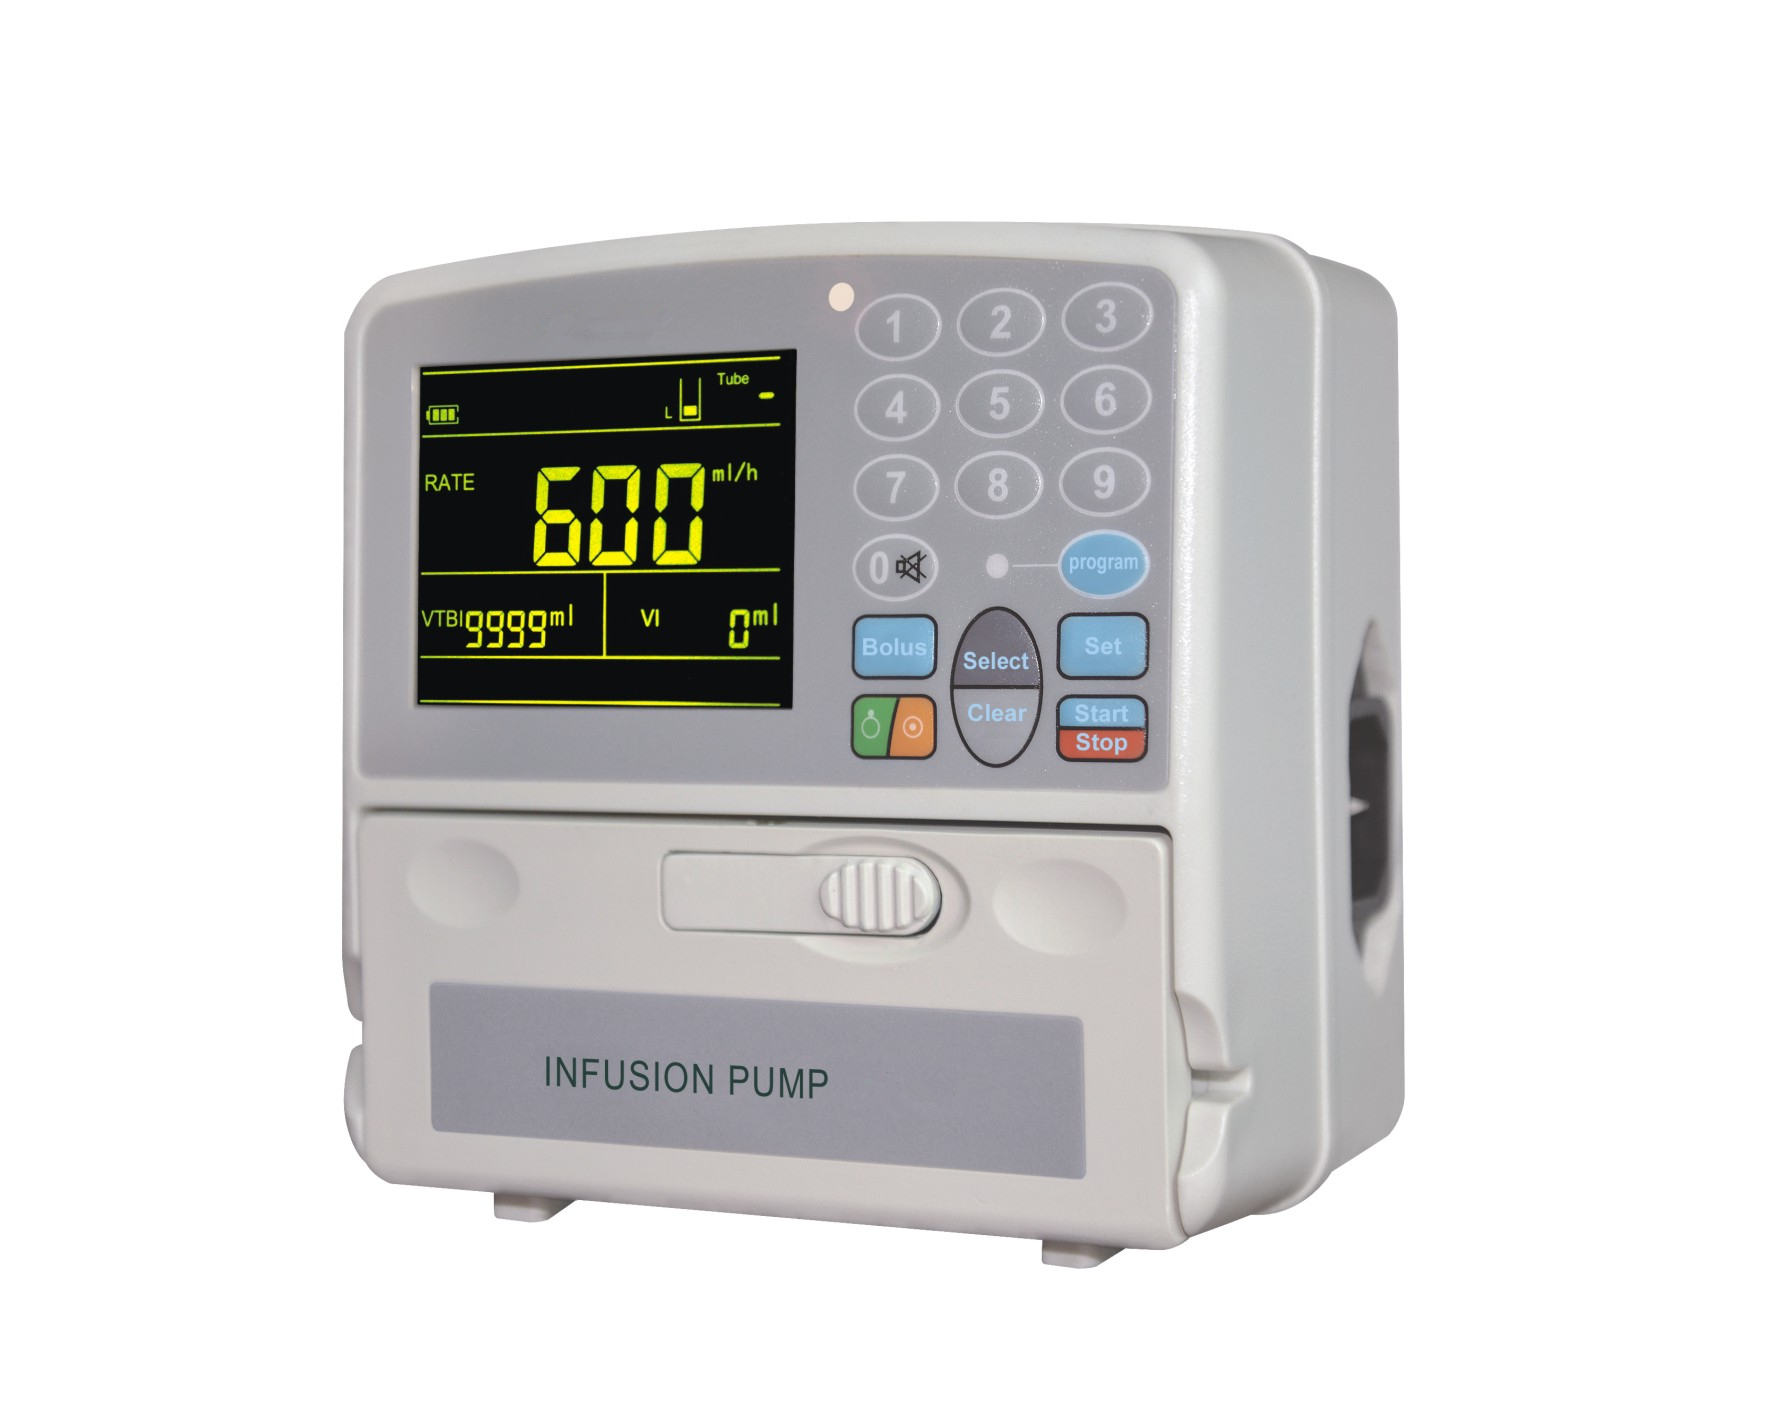 IP-200A Infusion Pump